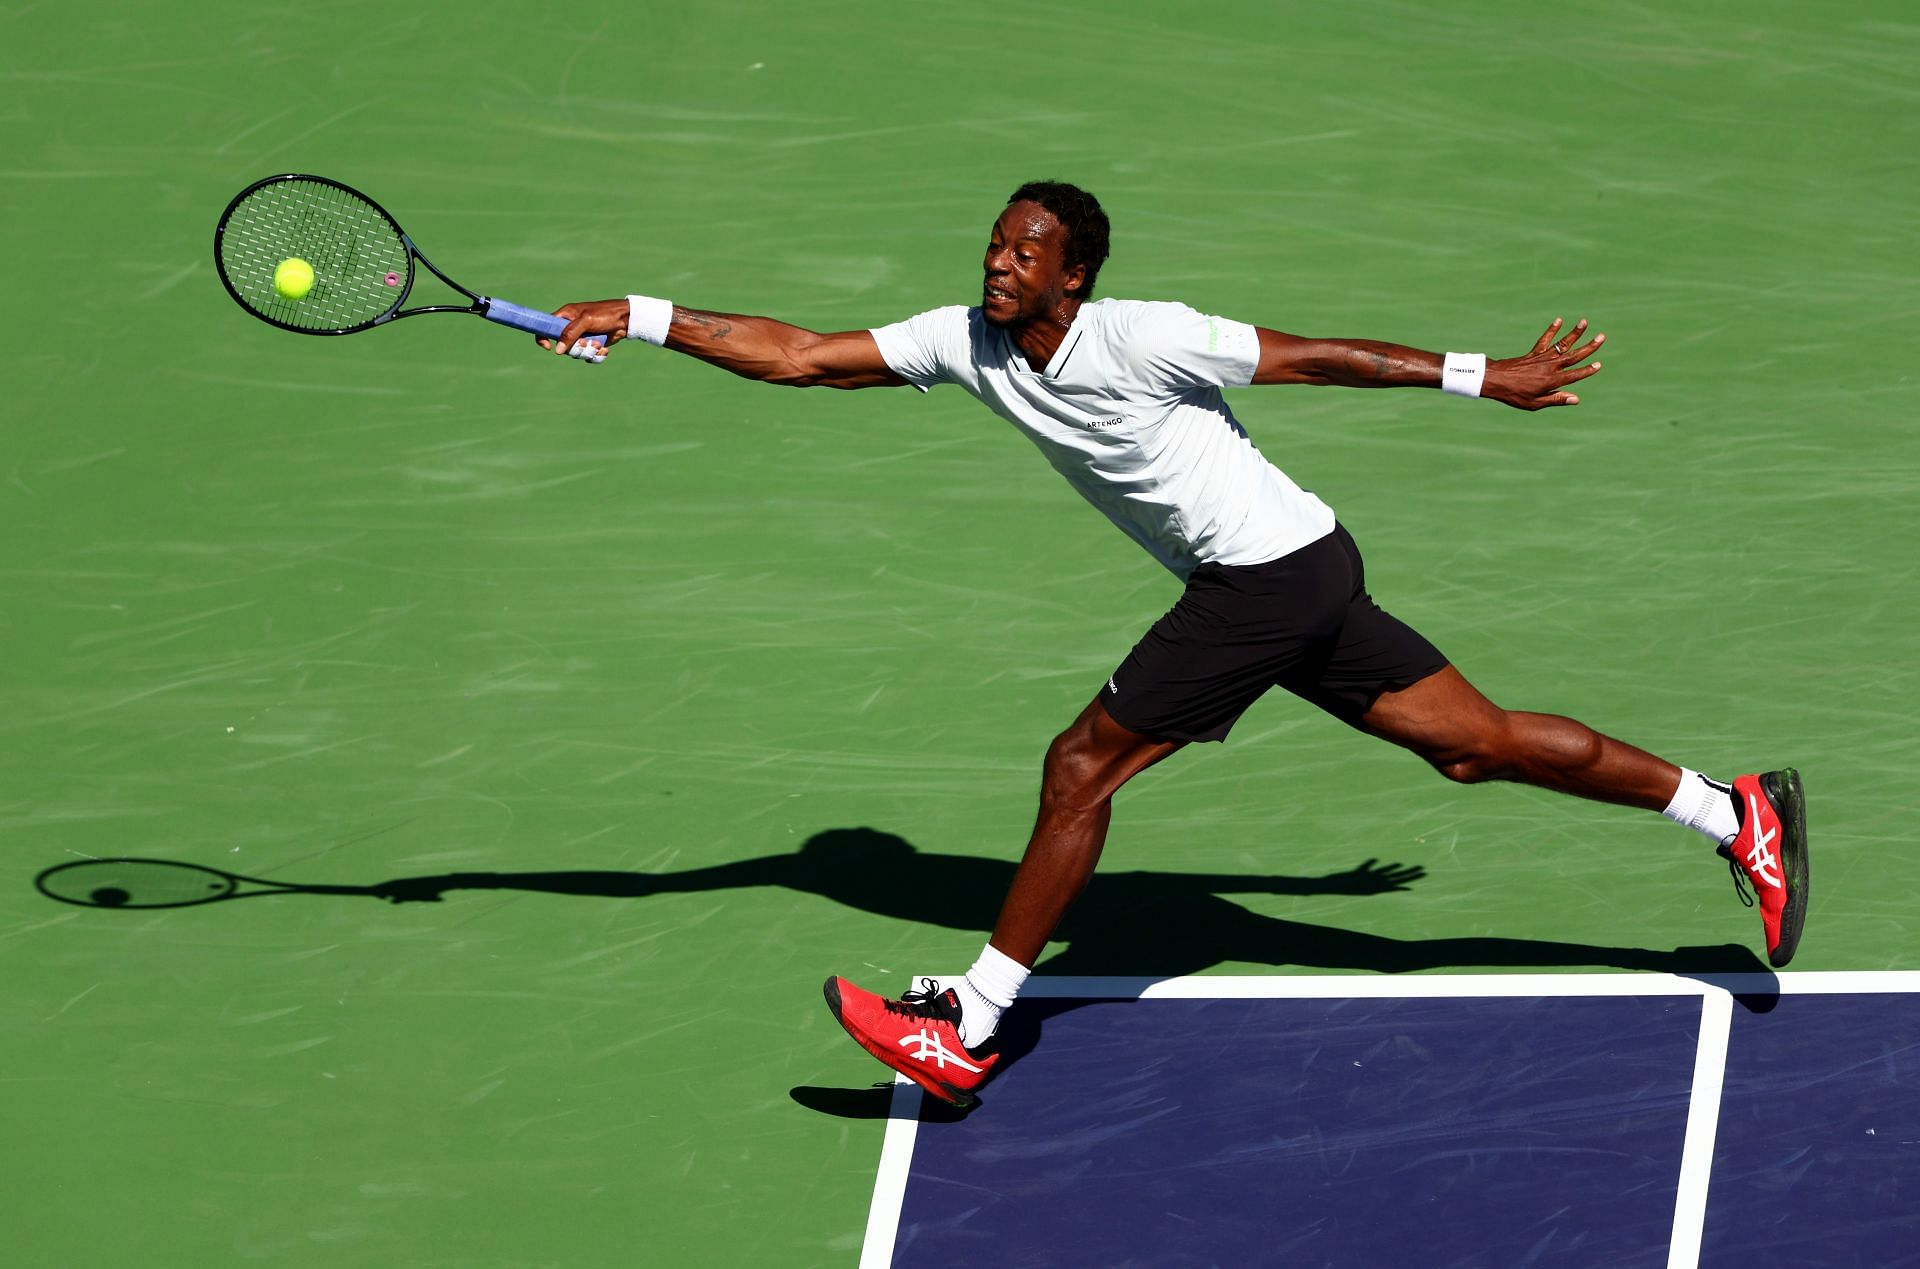 Gael Monfils is an entertainer on the court.